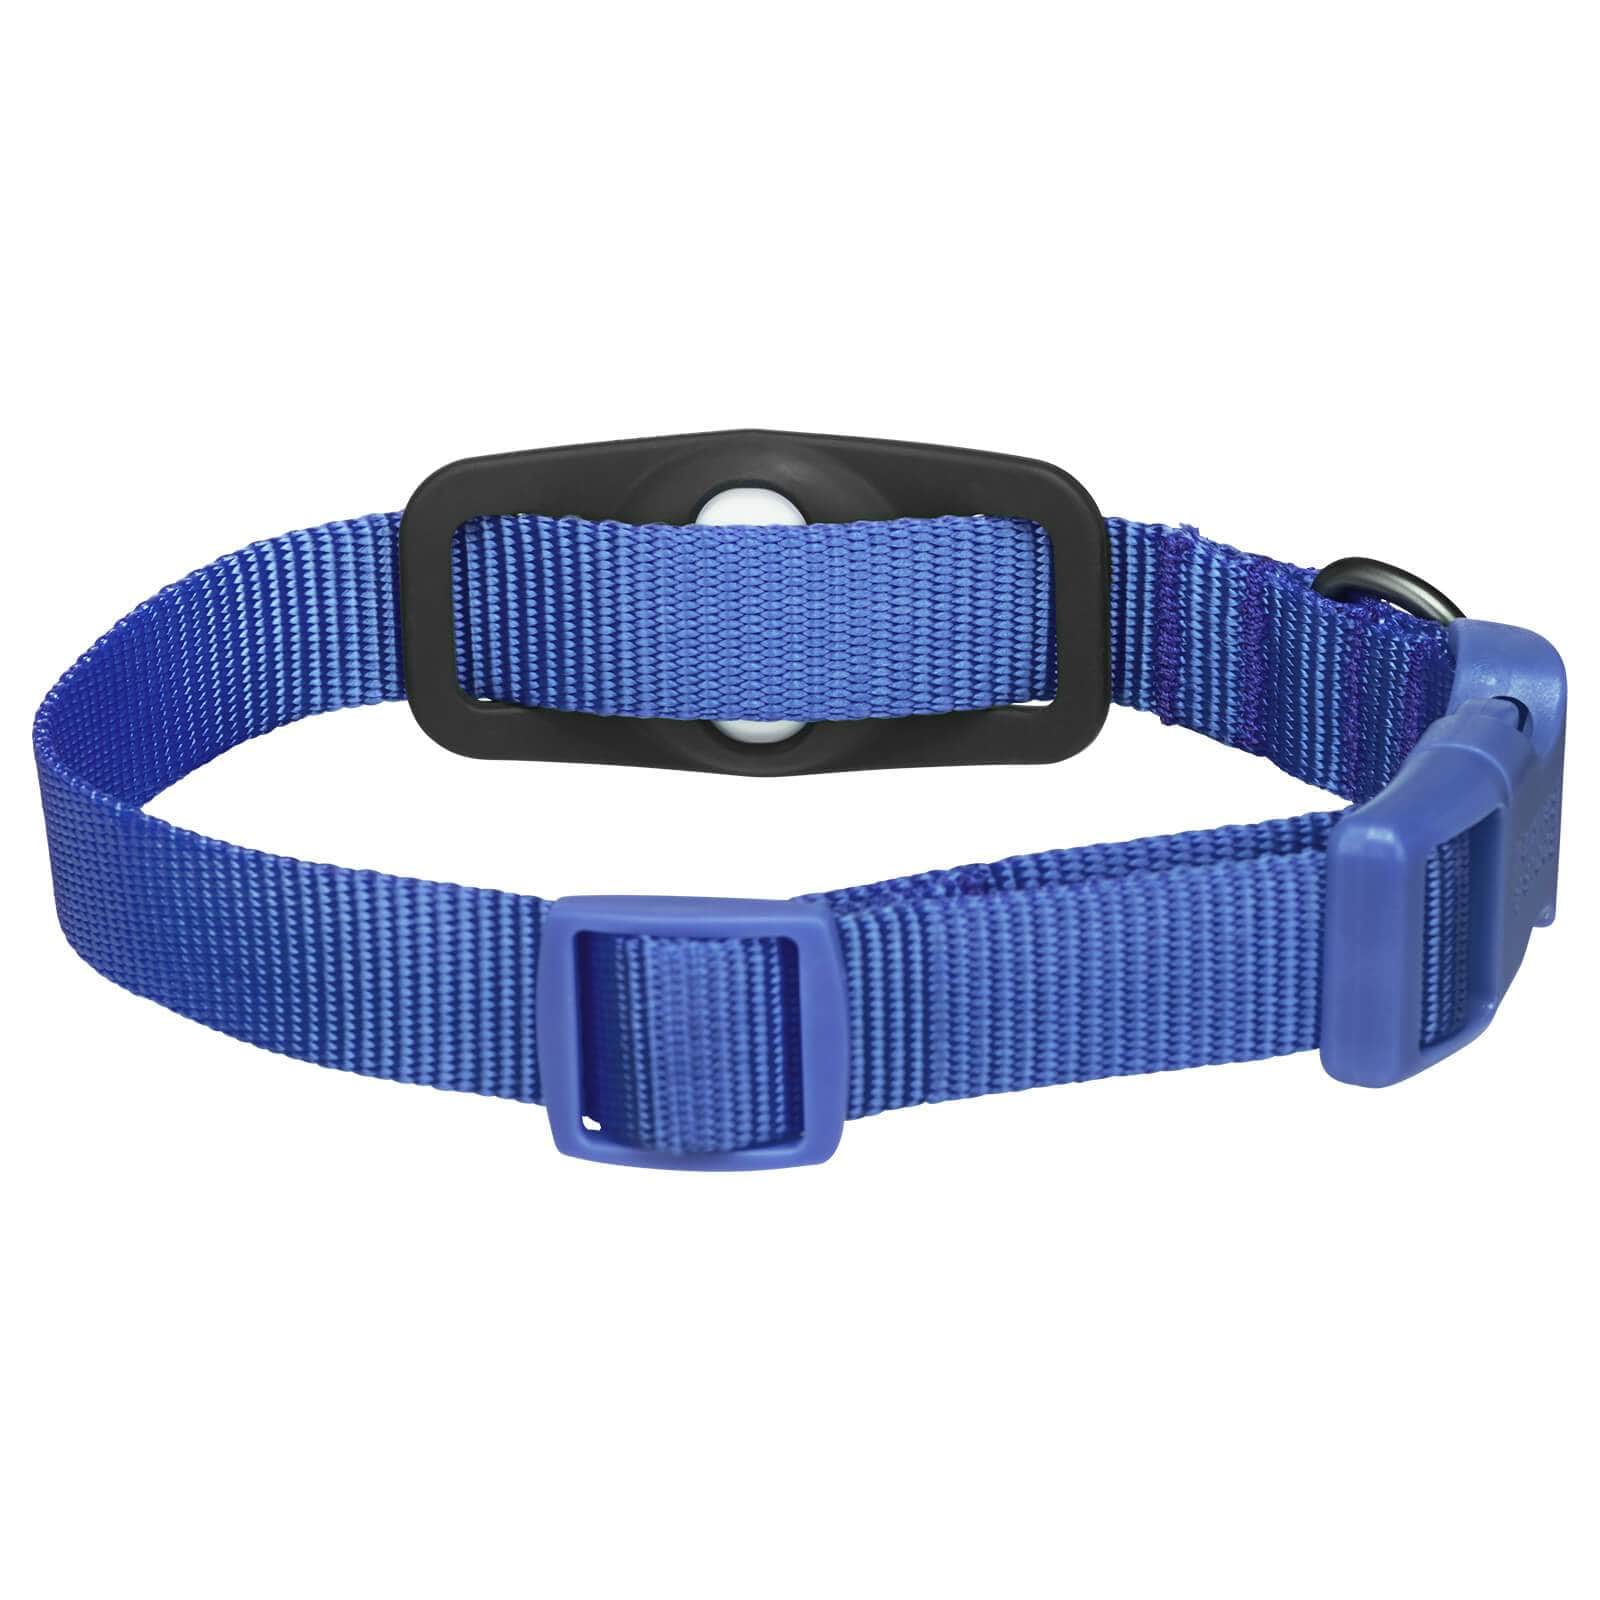 Fit comfortably around most pet collars. color::Black